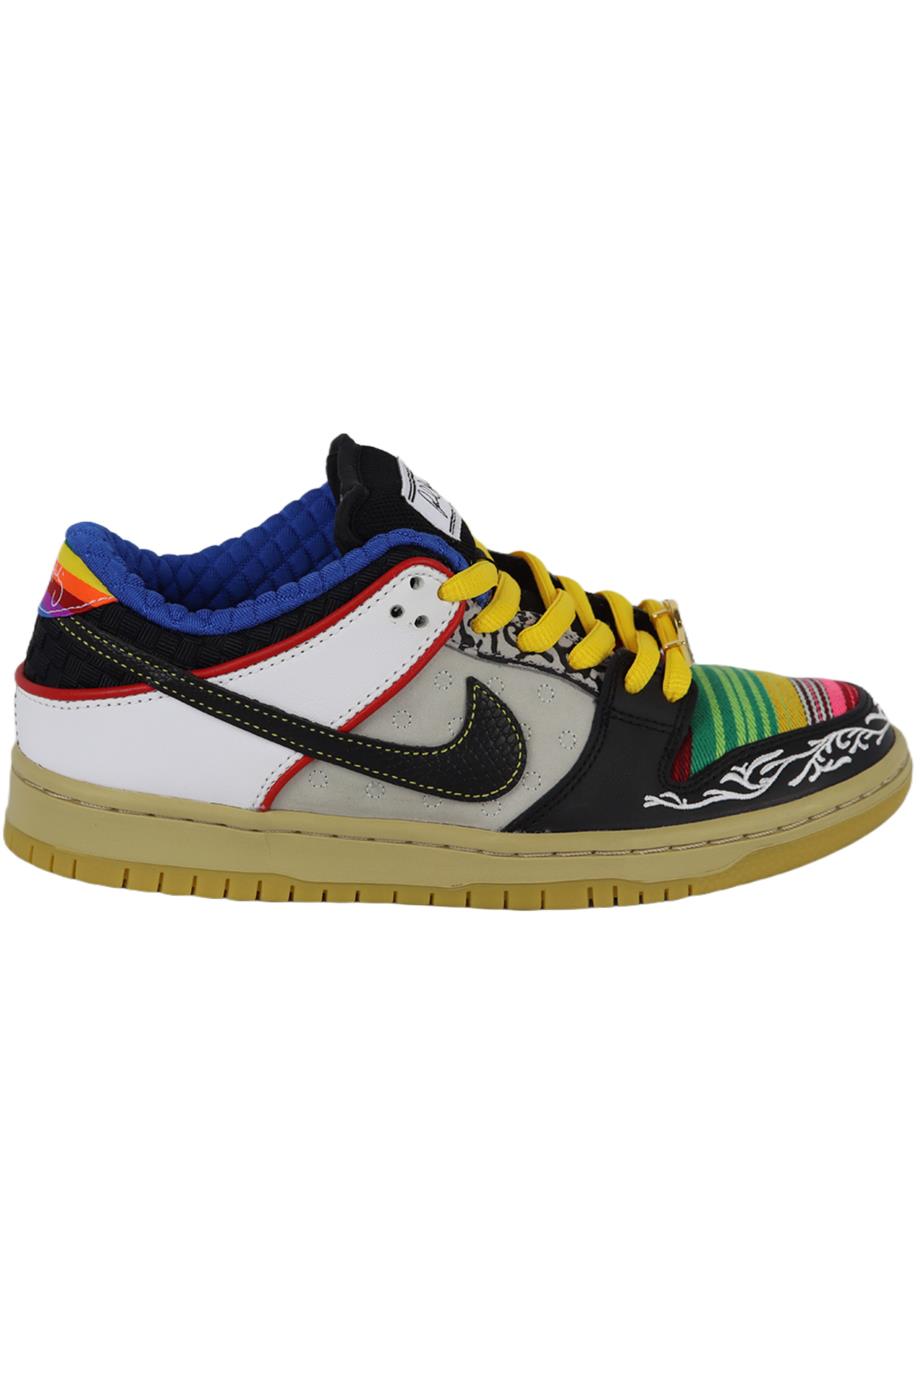 NIKE SB DUNK LOW WHAT THE P-ROD LEATHER SNEAKERS EU 39 UK 6 US 6.5